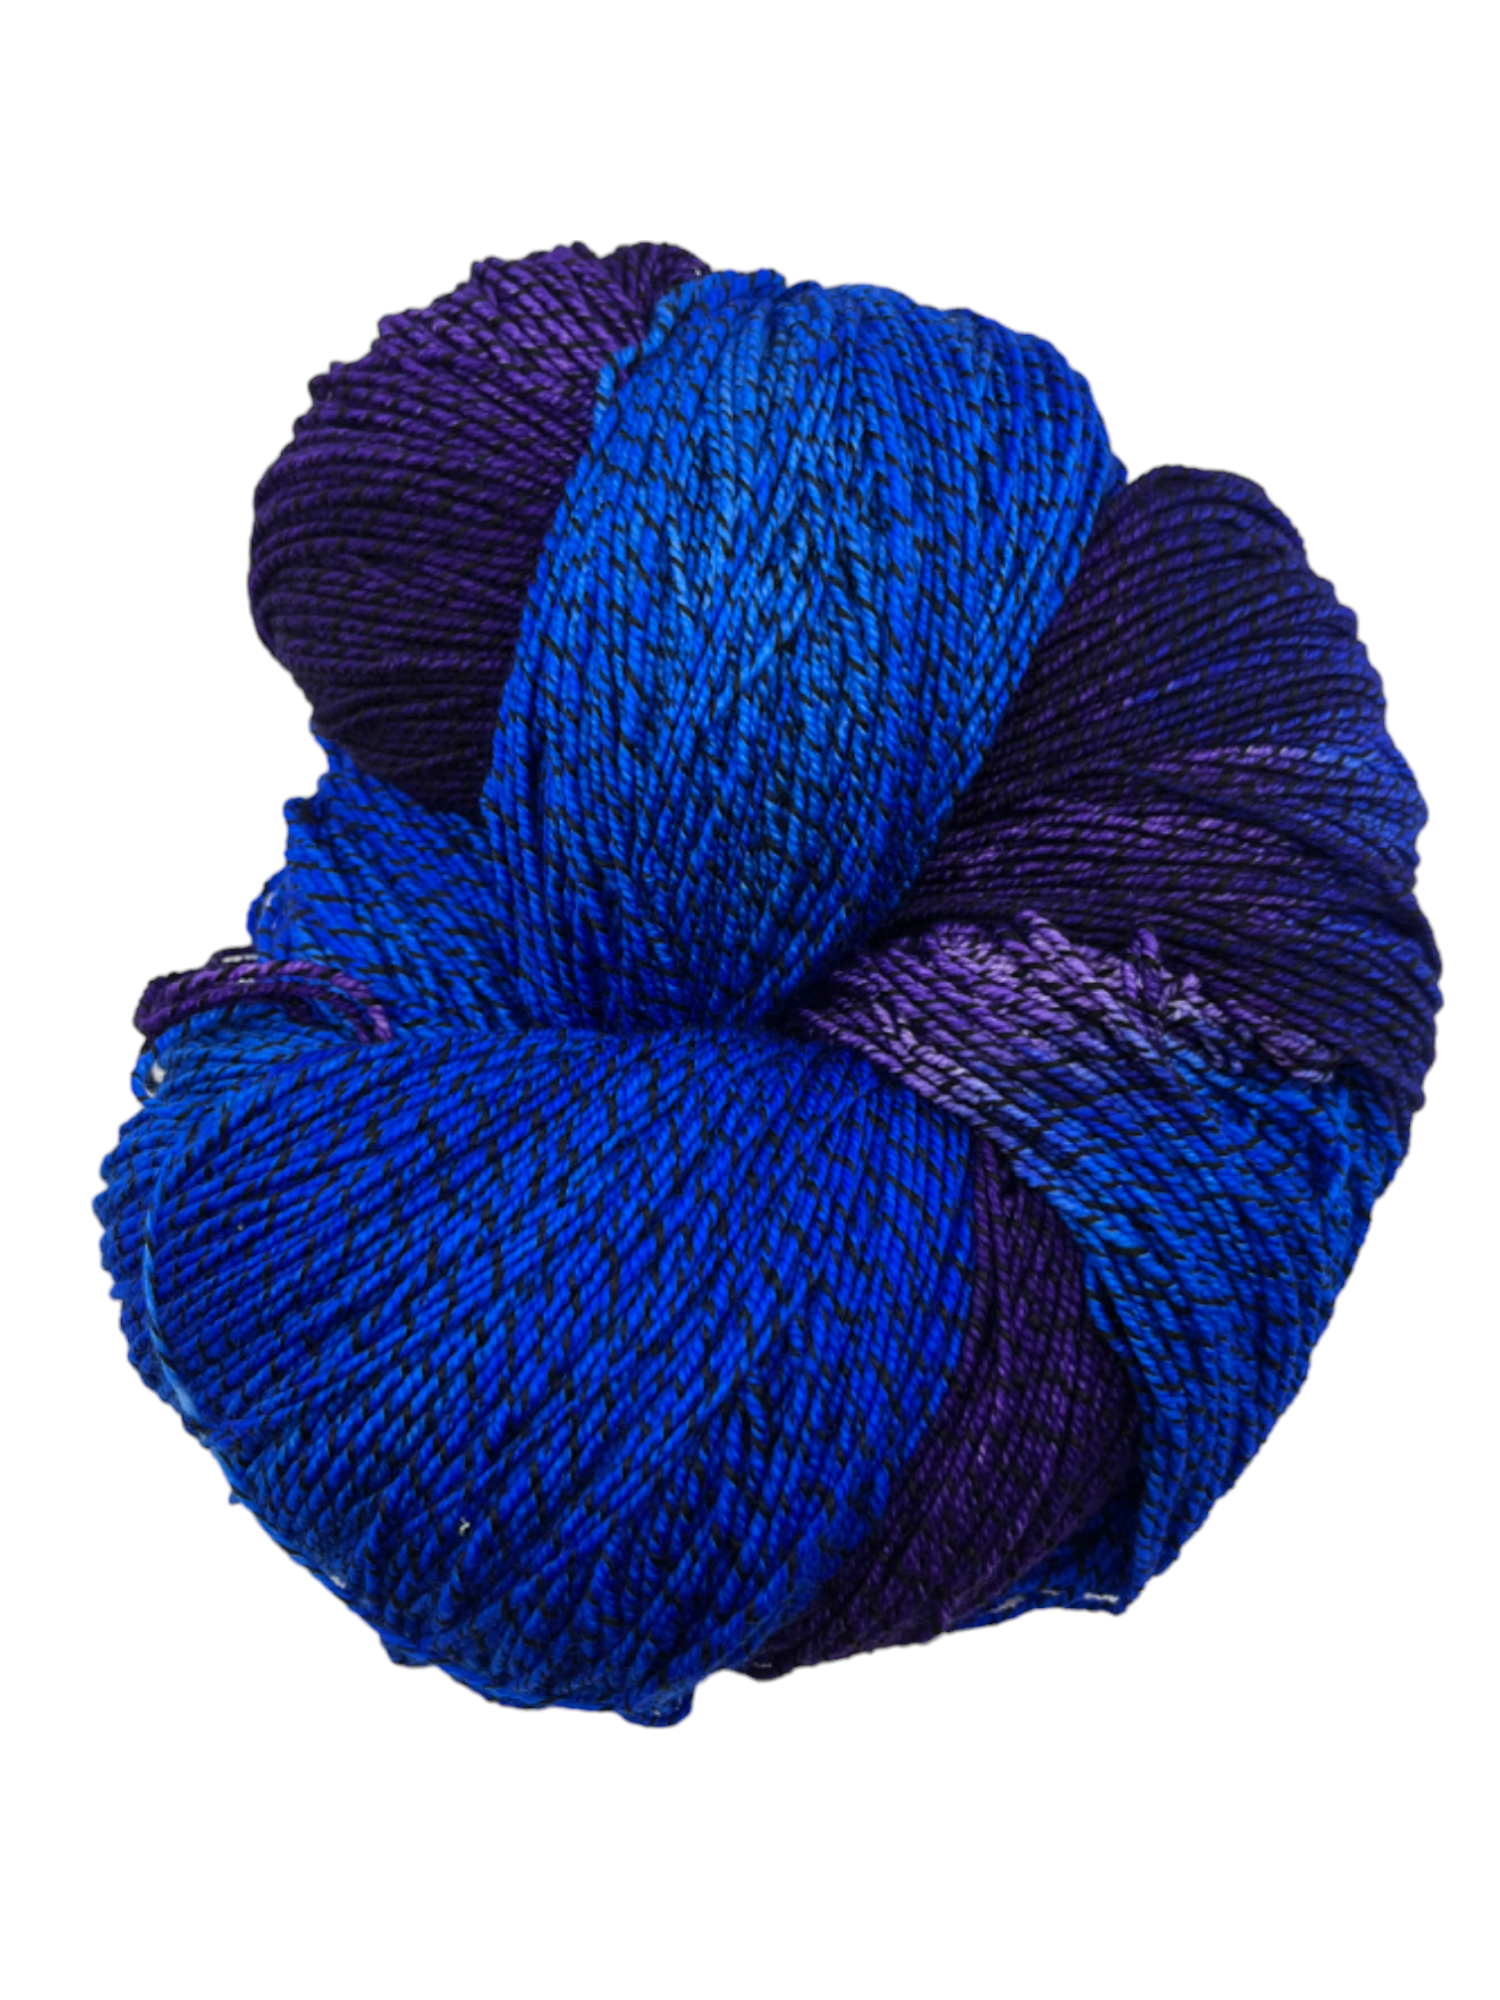 Nightshade Worsted Queen Size 28